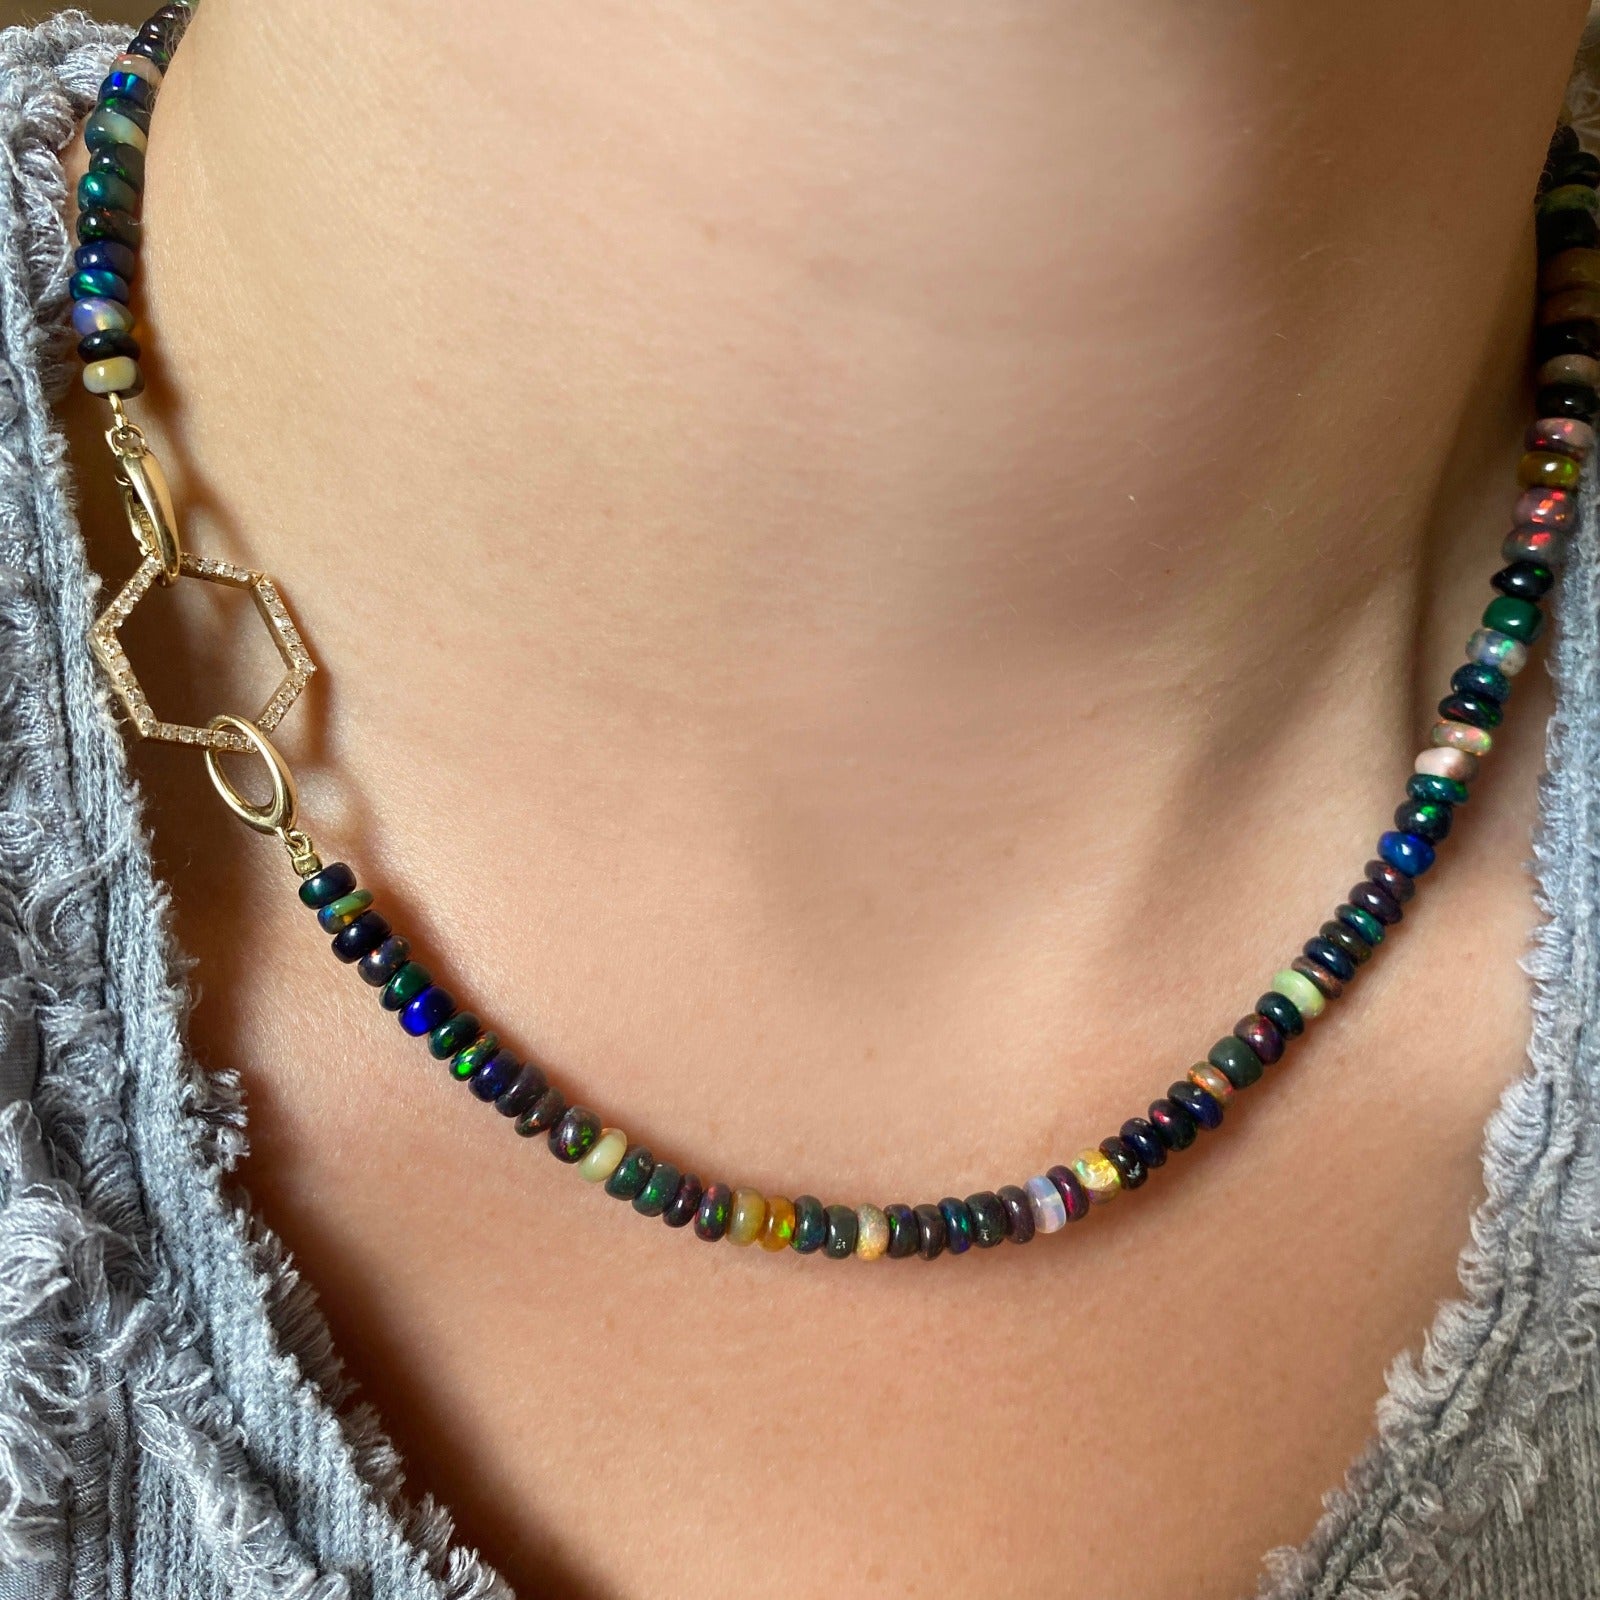 Shimmering beaded necklace made of smooth opal rondels in shades of black, dark green, navy, and clear on a slim gold lobster clasp. 